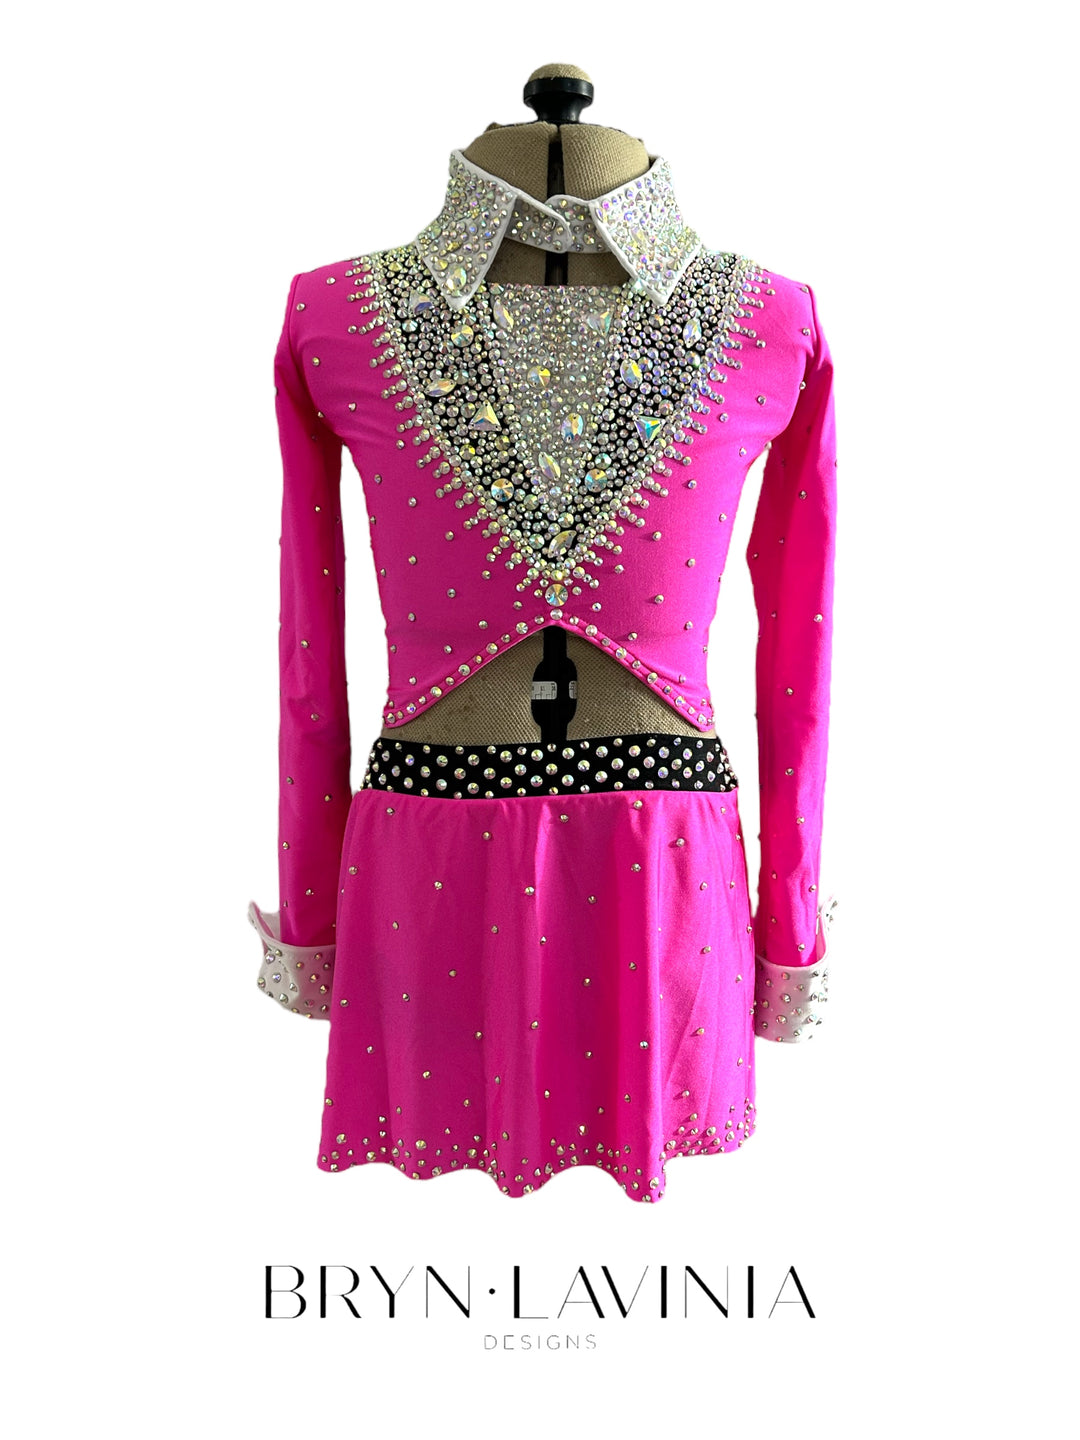 NEW CL pink/black/white ready to ship costume